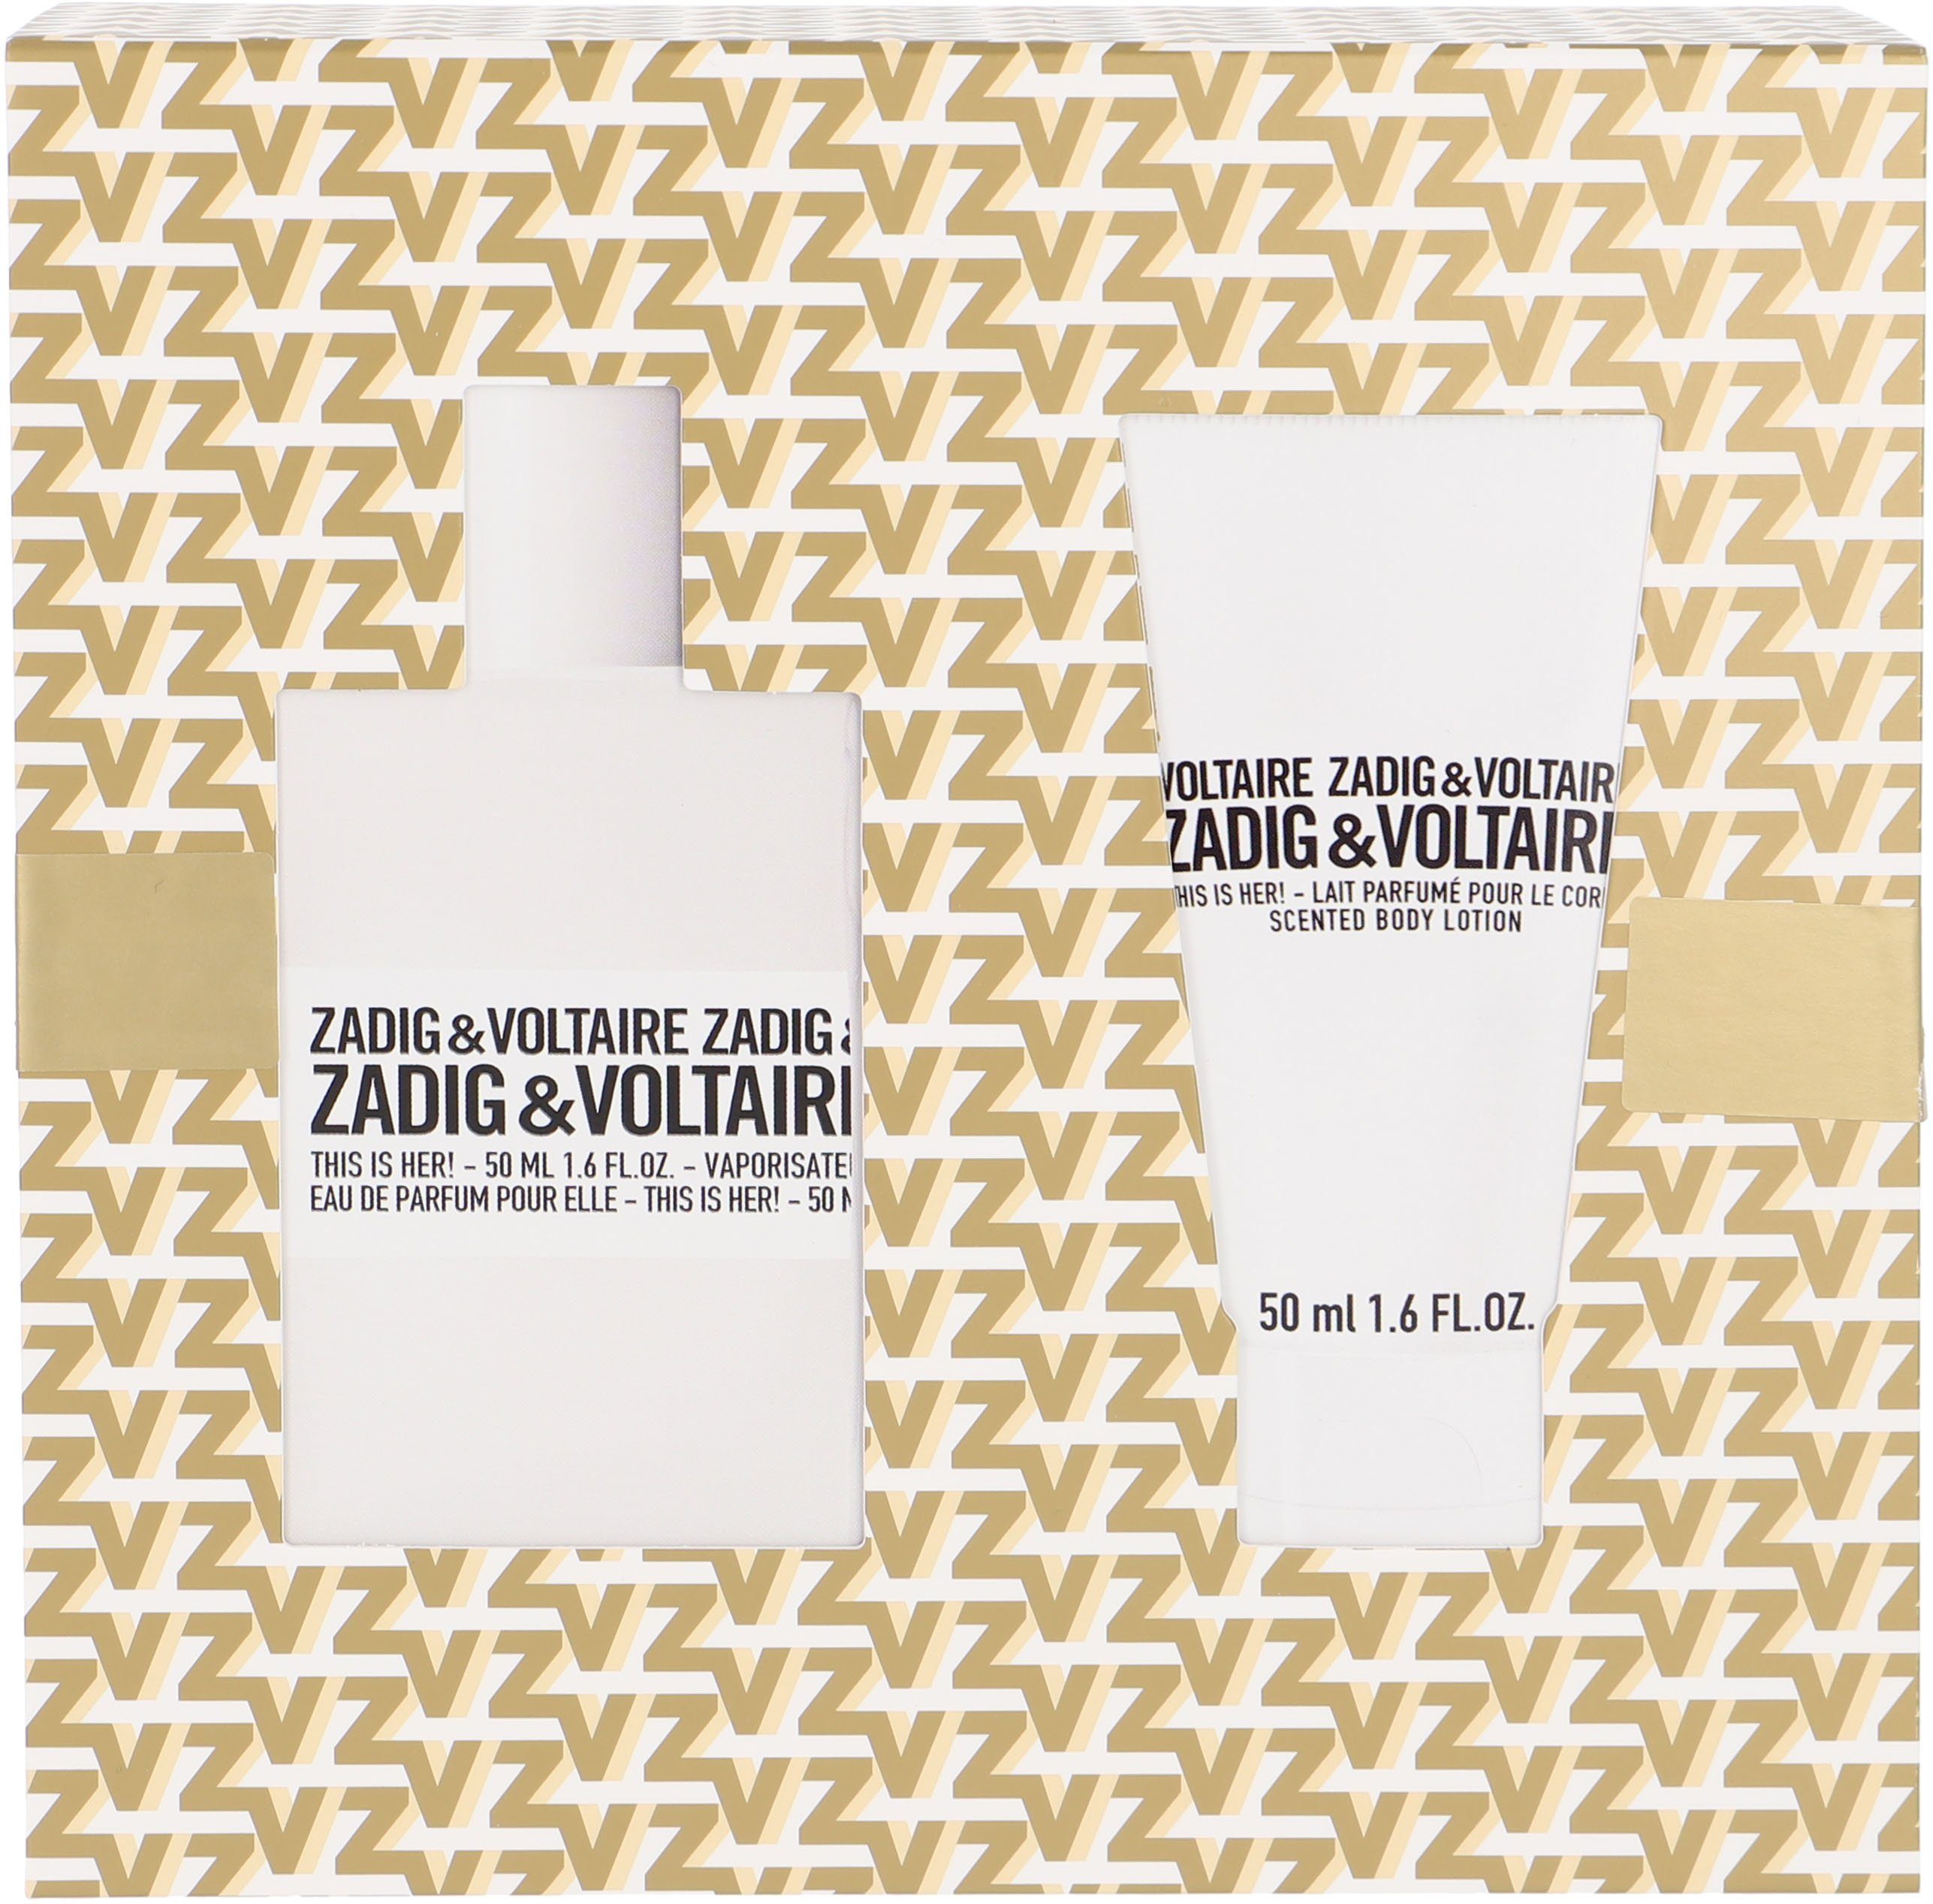 ZADIG & Her!, is This 2-tlg. VOLTAIRE Duft-Set